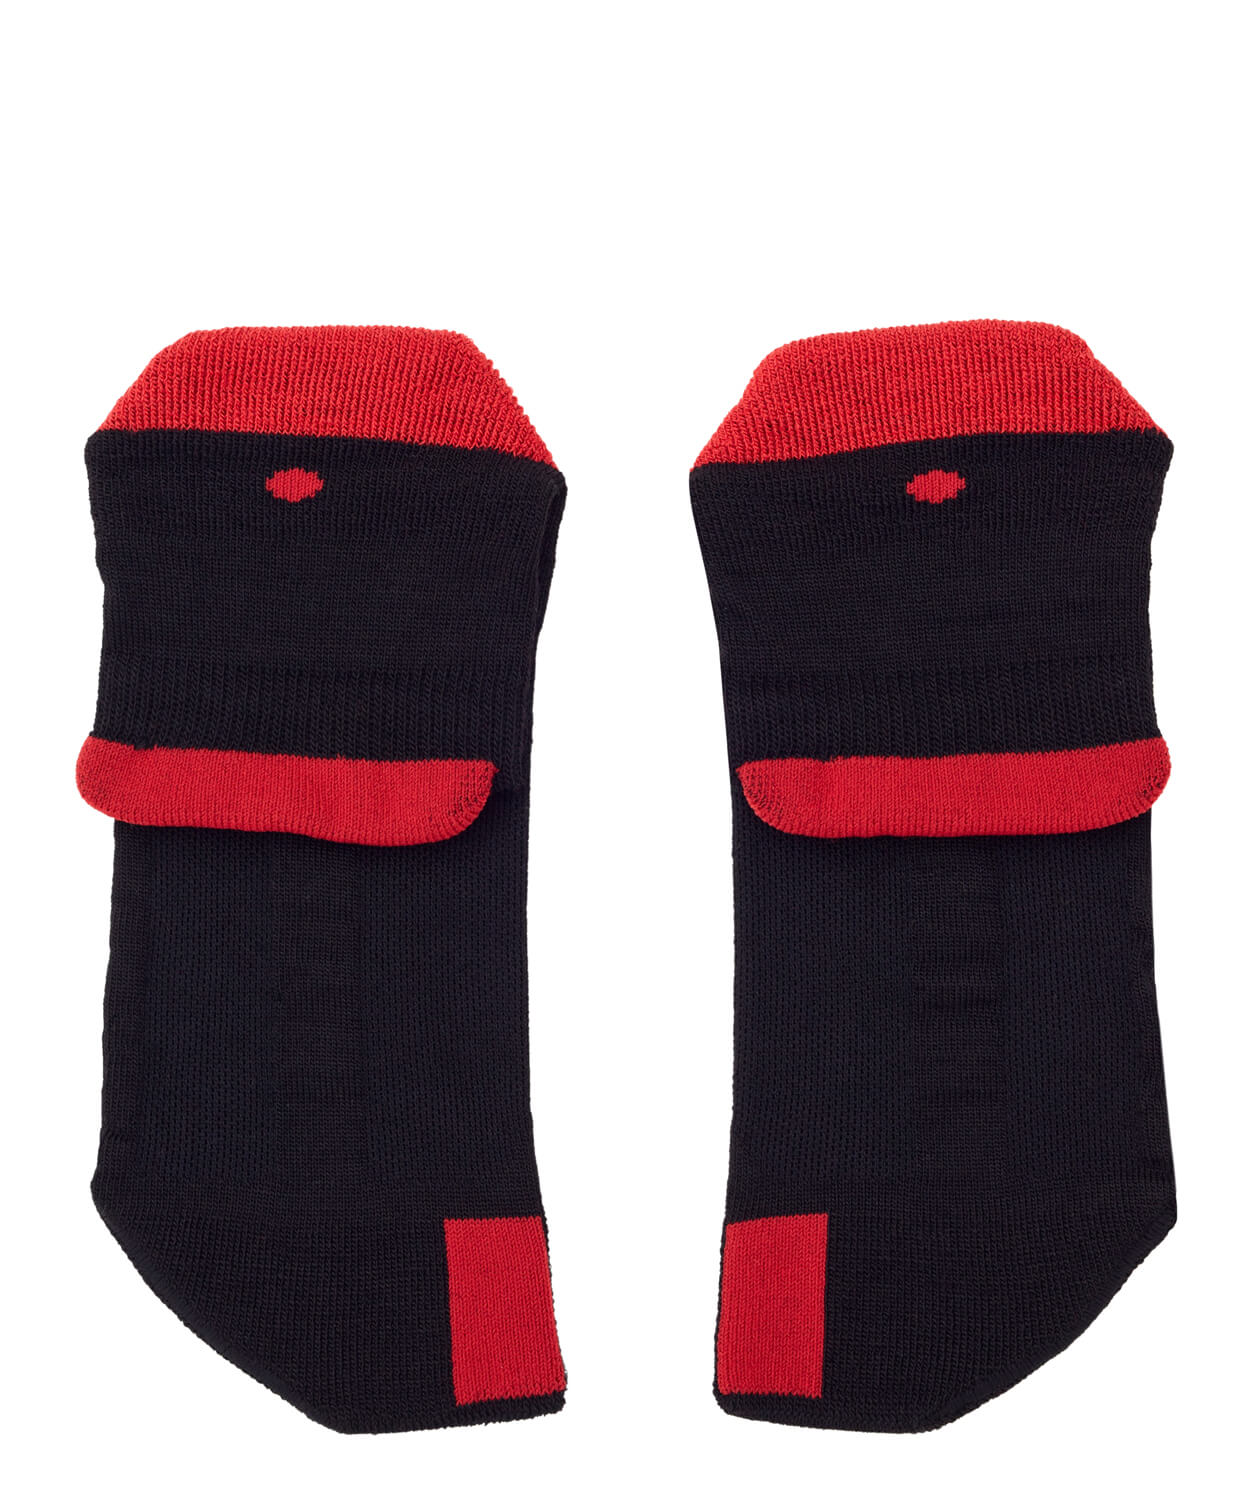 BABY'S plus12socks: SPECIAL EDITION PRO-SKID SOCKS FOR BABIES